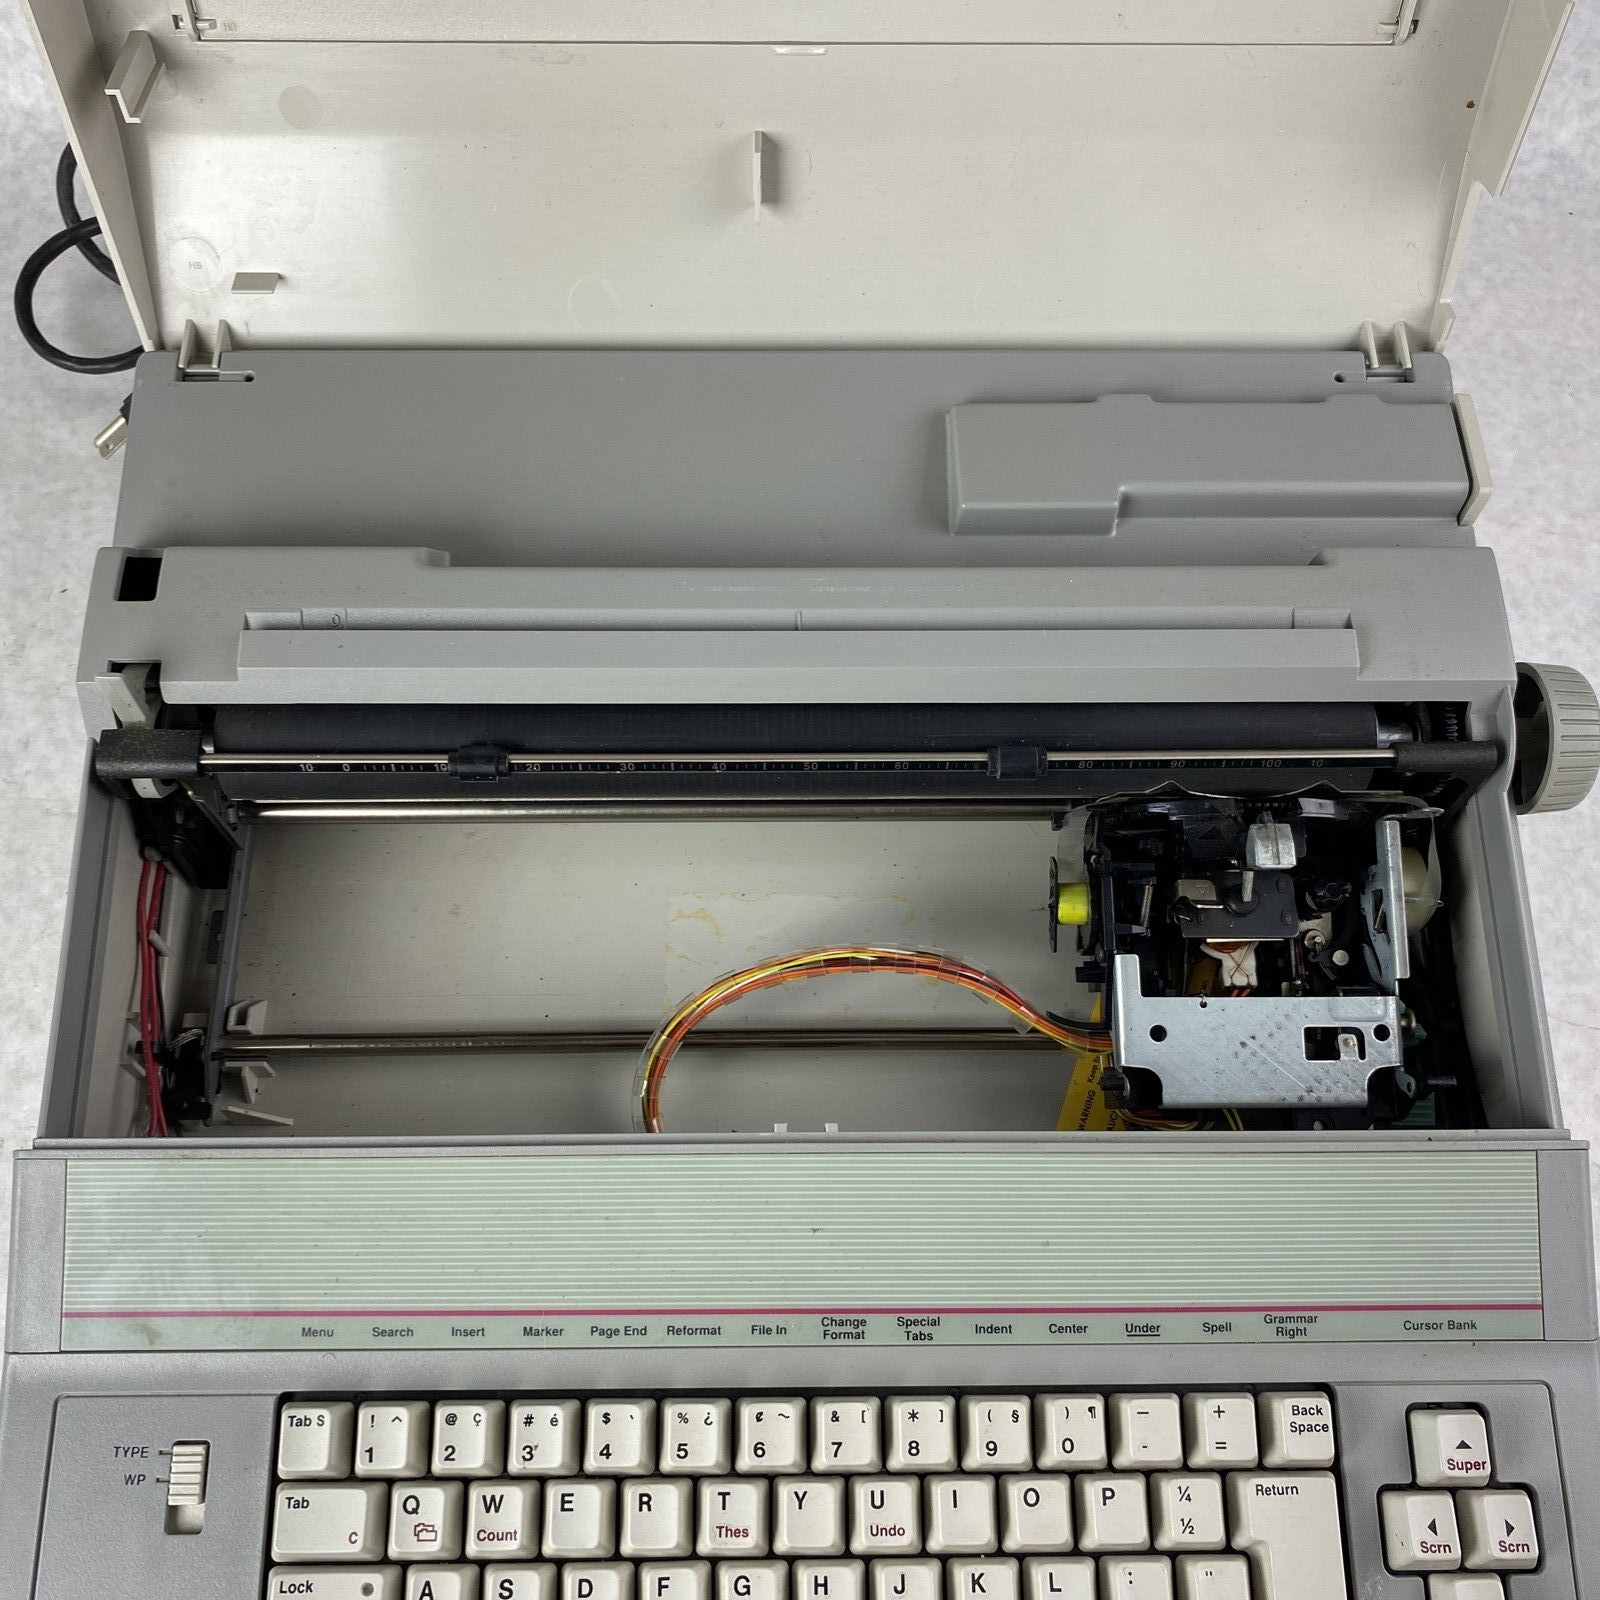 Smith Corona PWP D350 Typewriter -No Accessories or Monitor